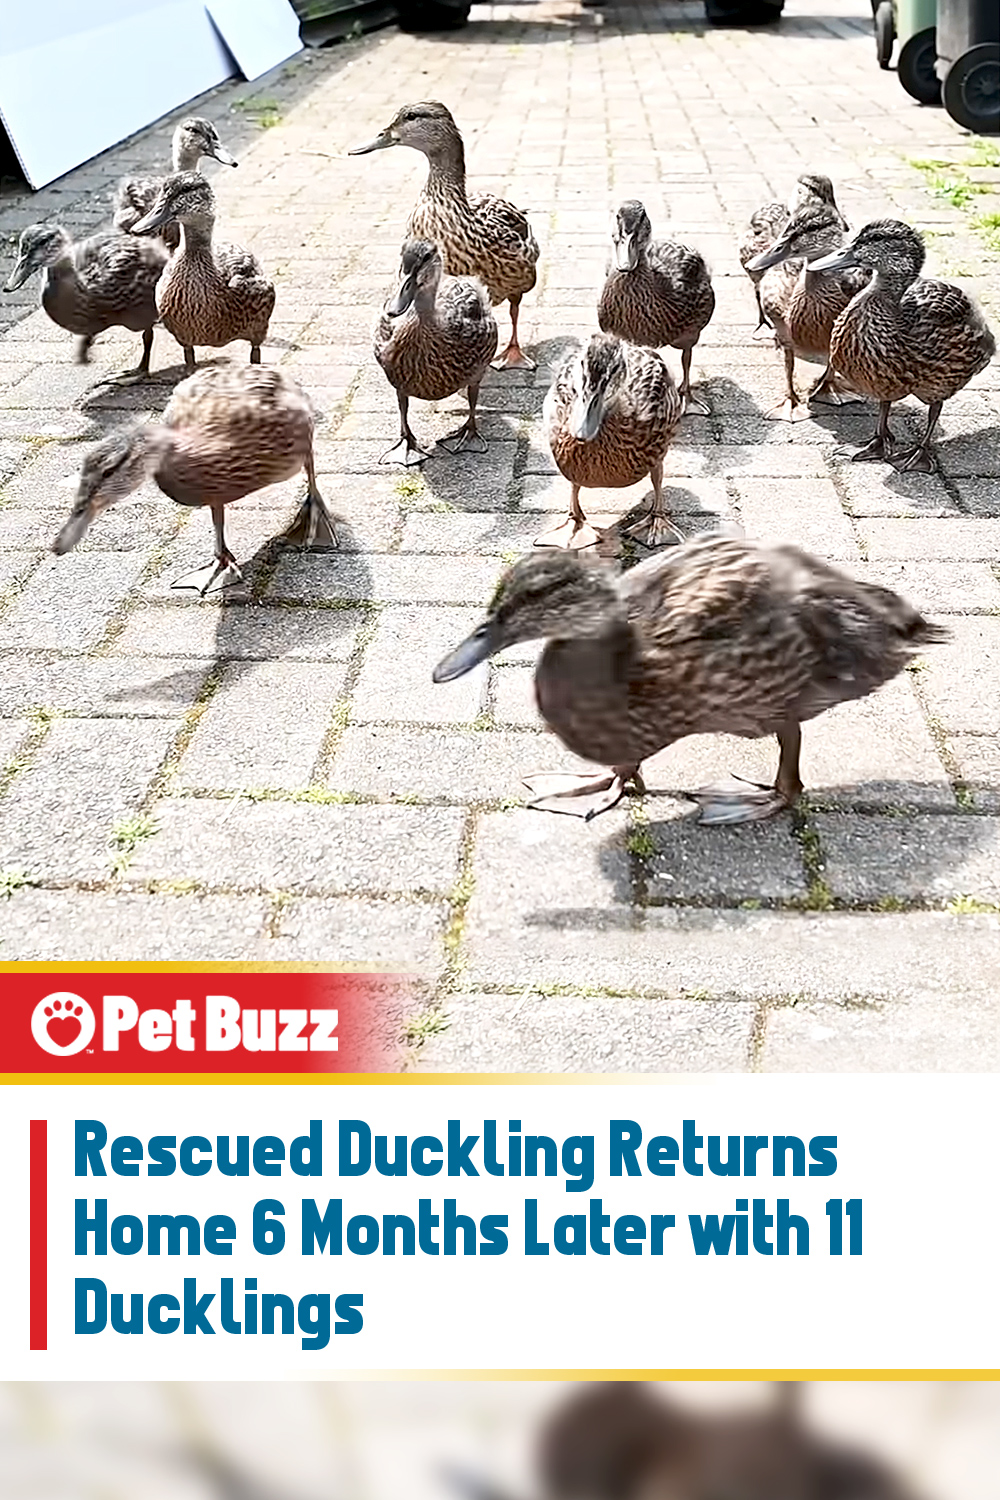 Rescued Duckling Returns Home 6 Months Later with 11 Ducklings